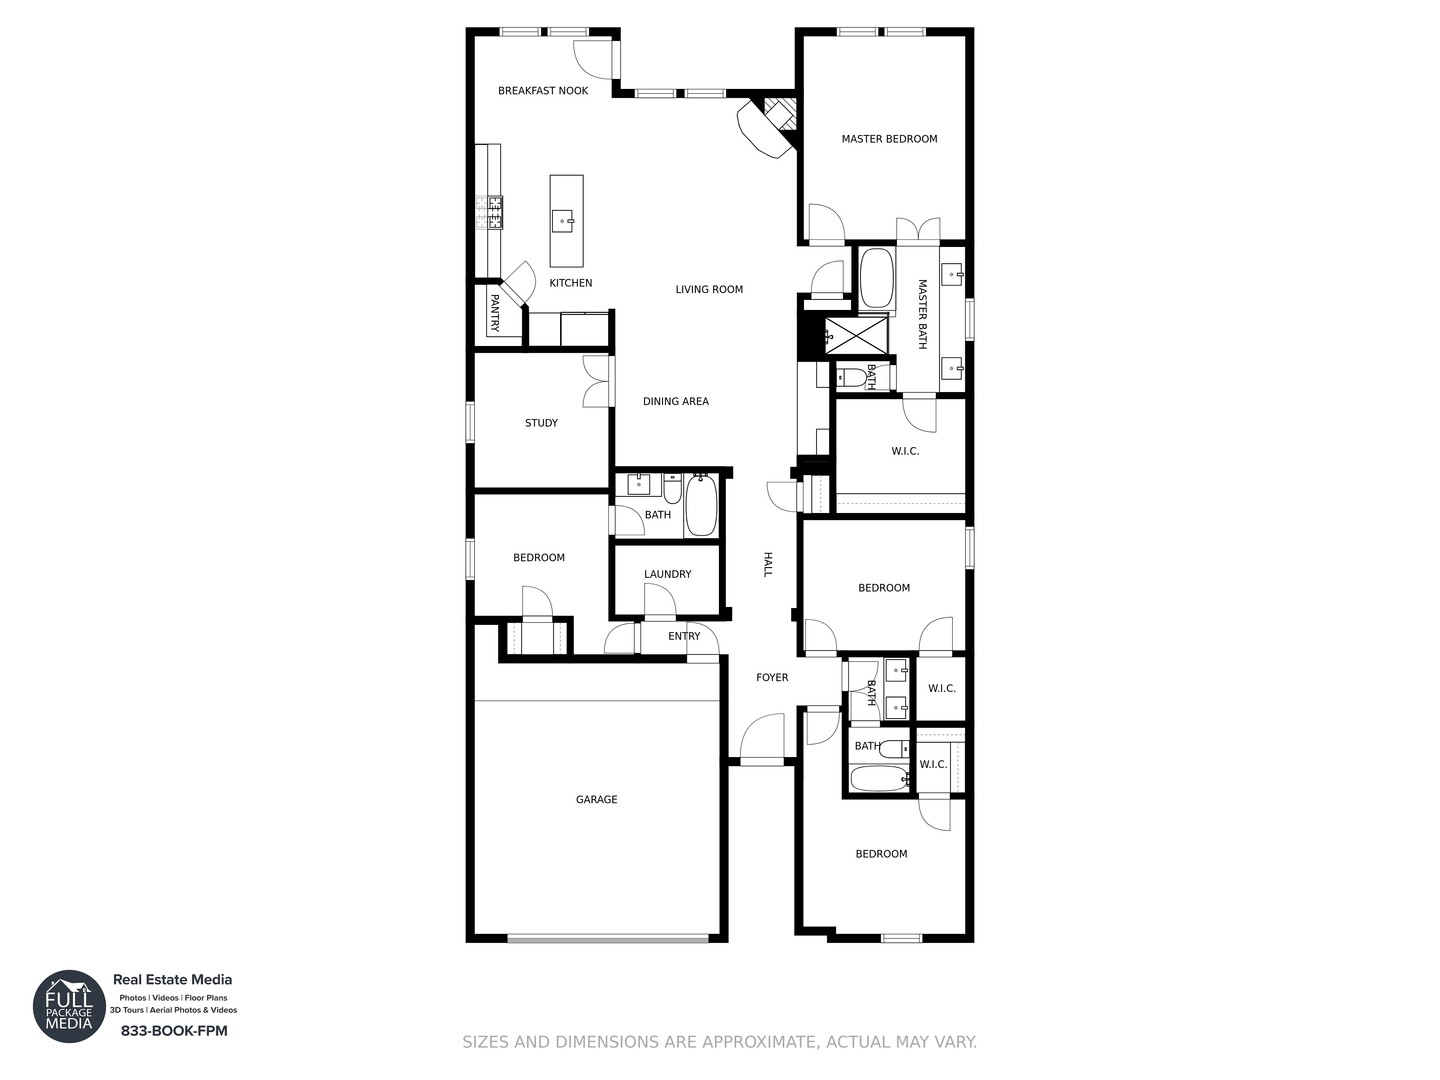 Professional Floor Plan Photography Dallas | Full Package Media